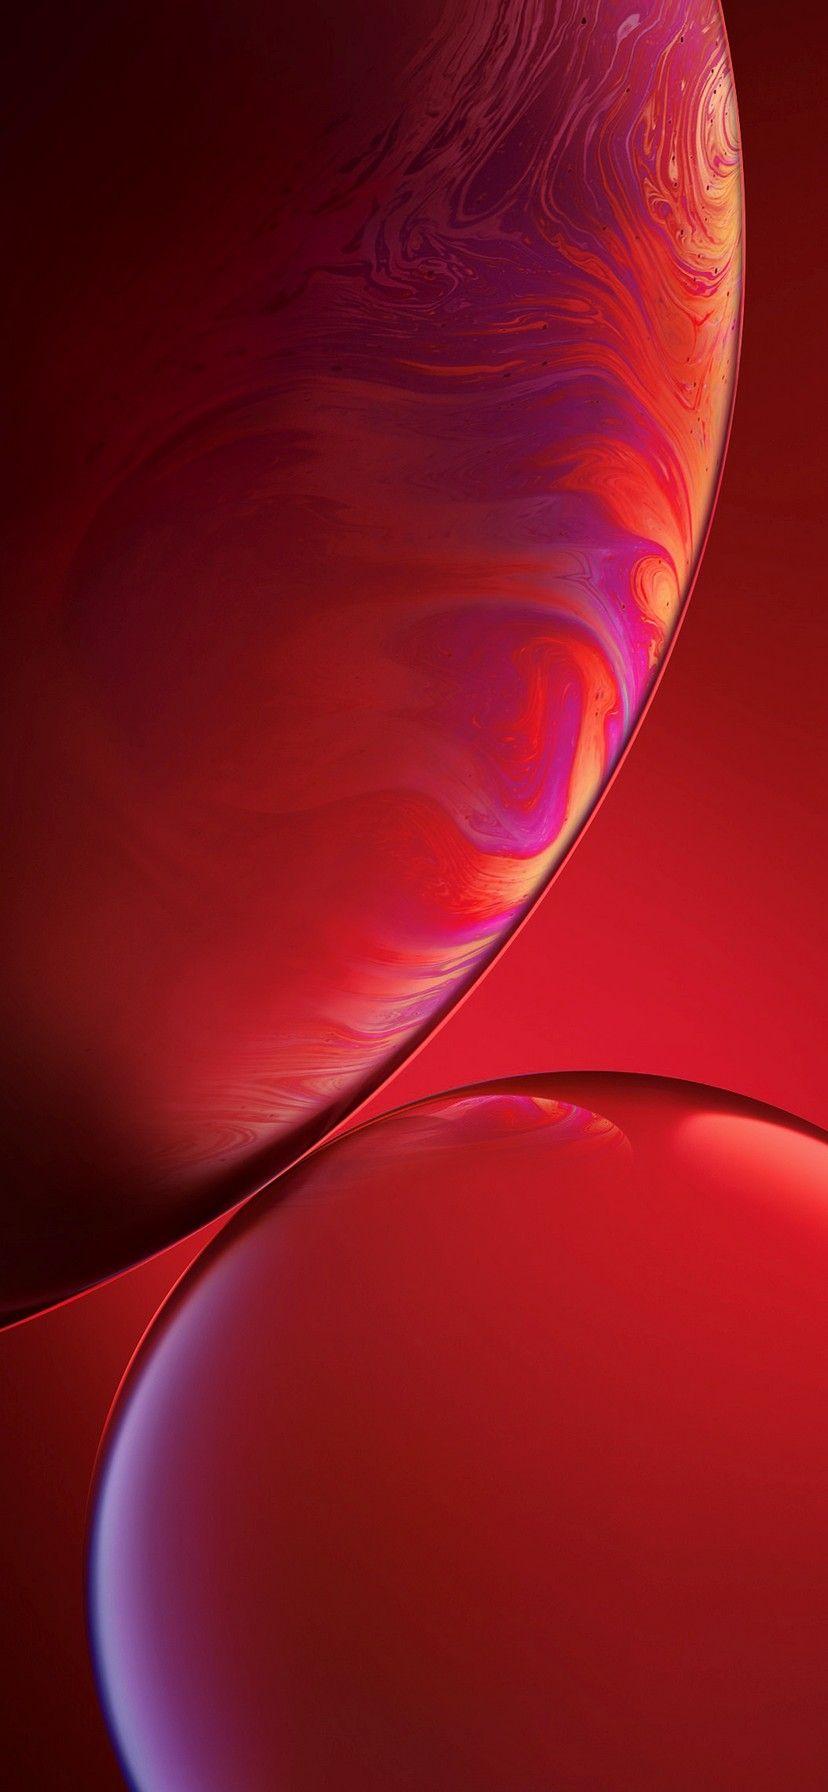 Iphone Xr Red Wallpapers Top Free Iphone Xr Red Backgrounds Wallpaperaccess